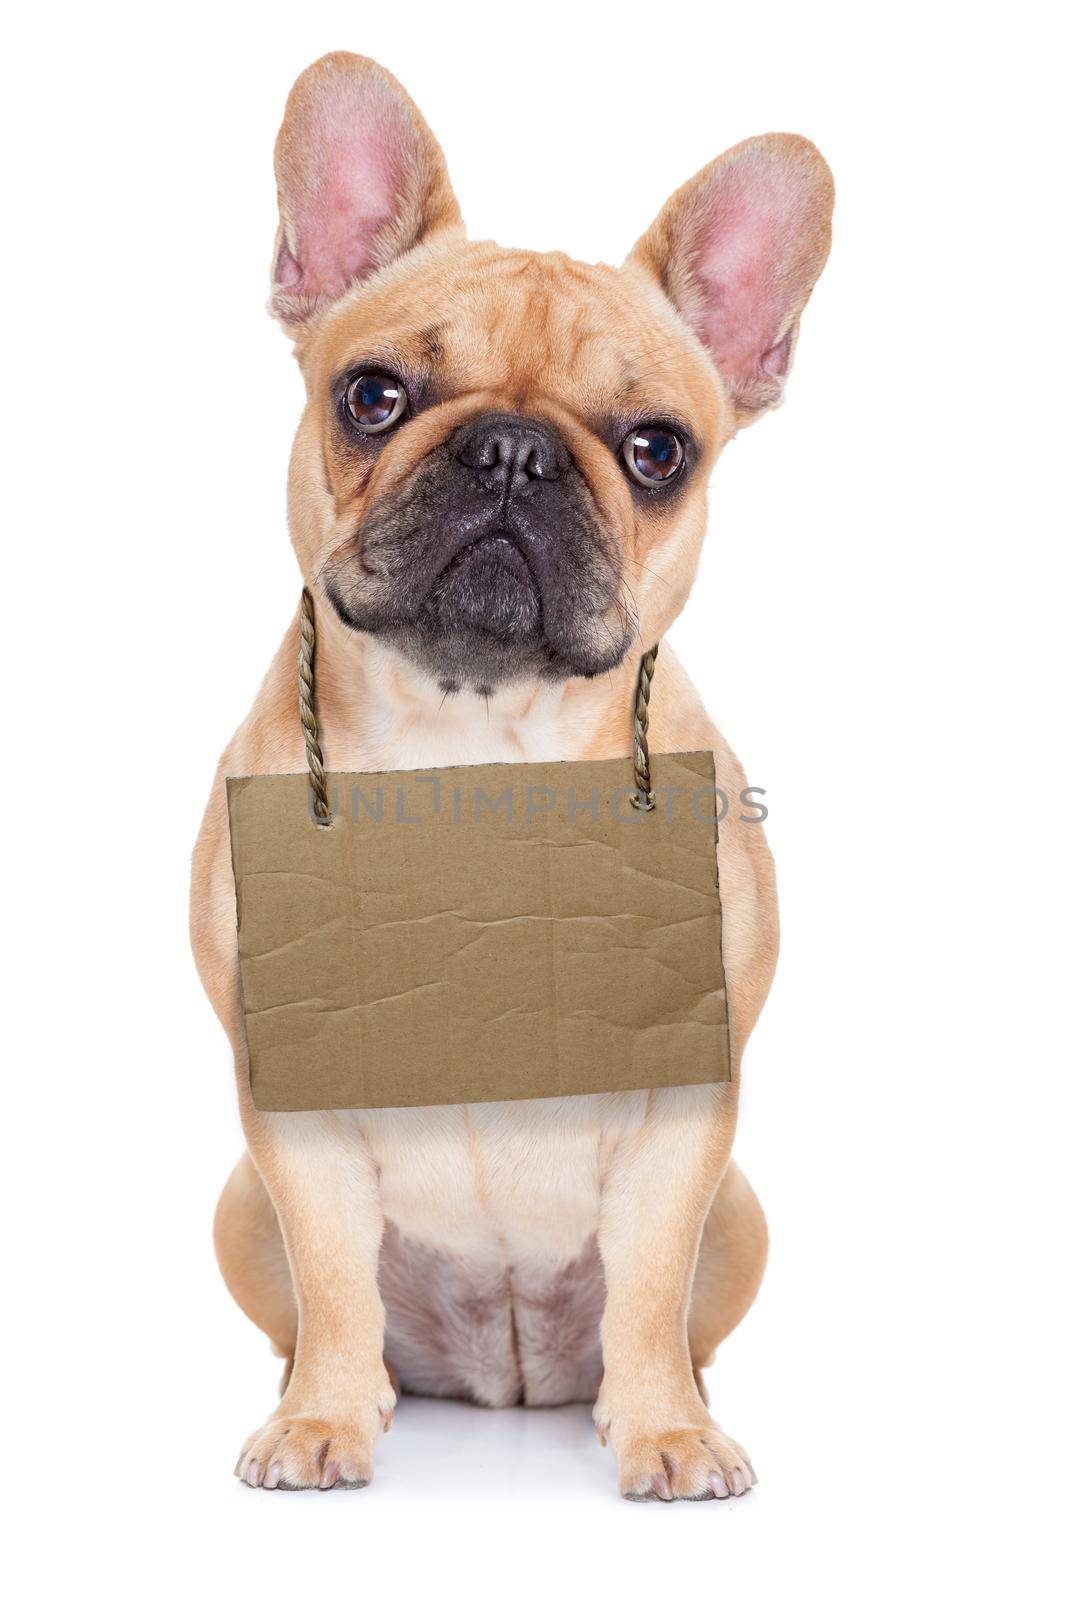 lost,homeless french bulldog with cardboard hanging around neck, isolated on white background, looking so sad